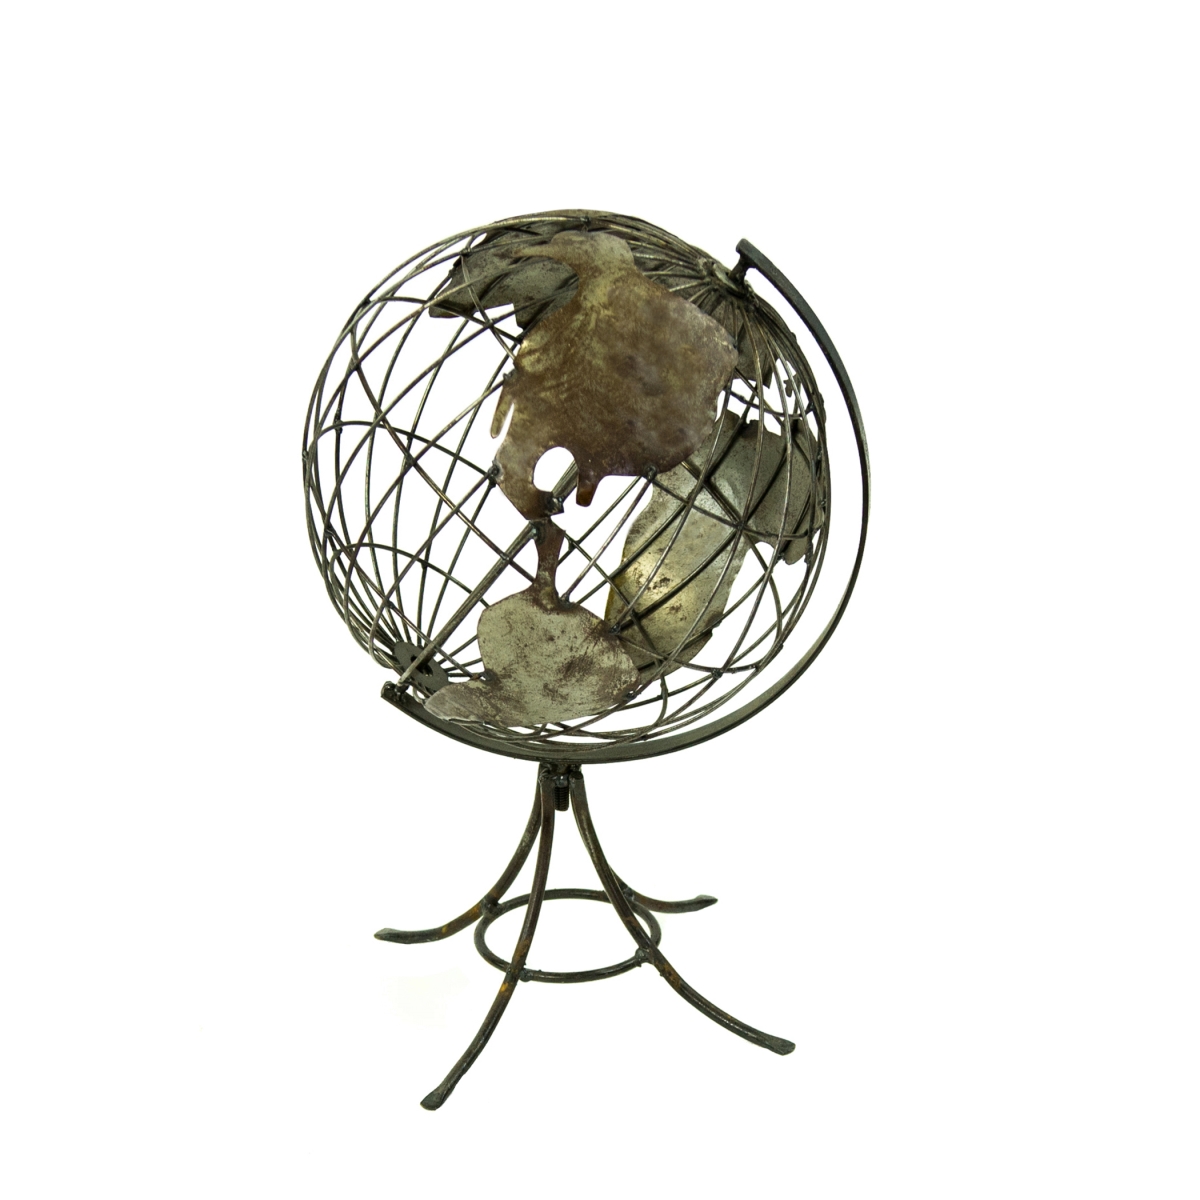 10538 Globe Map For Decor - 12 X 18 In.